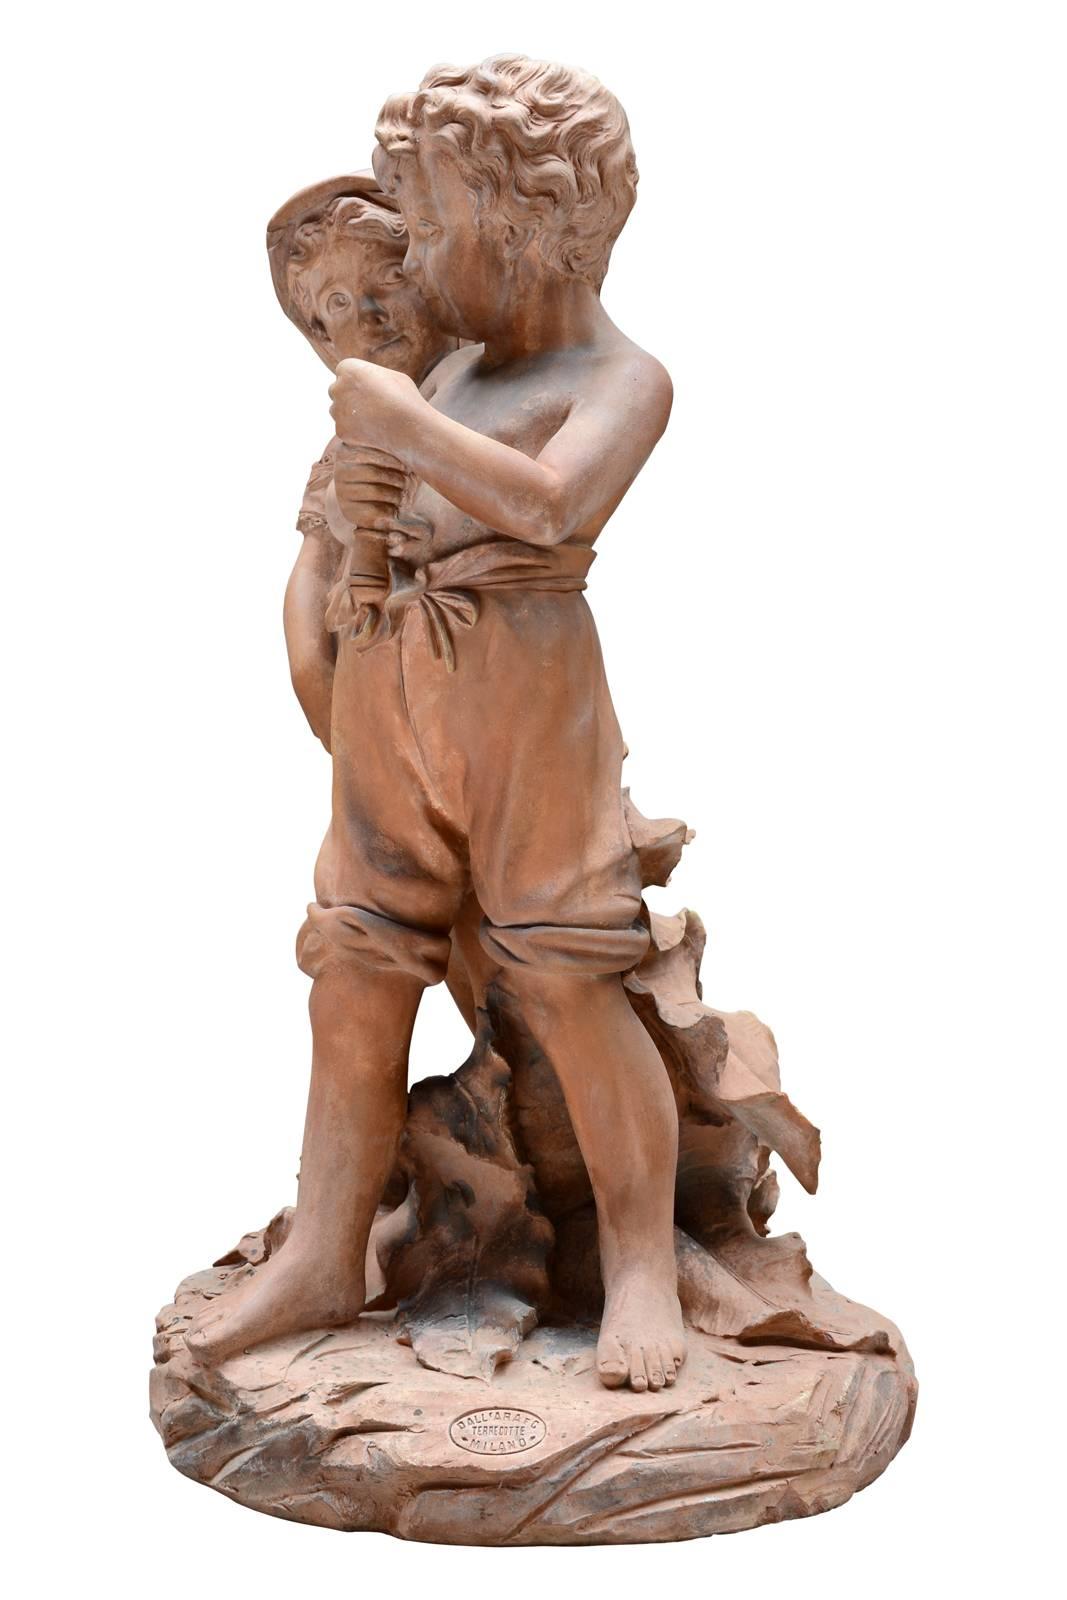 Terracotta statue dated from the 19th century, circa 1890 and depicting two children tight against each other under what should have been an umbrella, indeed the little boy holds tightly in his hands a handle. The two children dressed poorly and